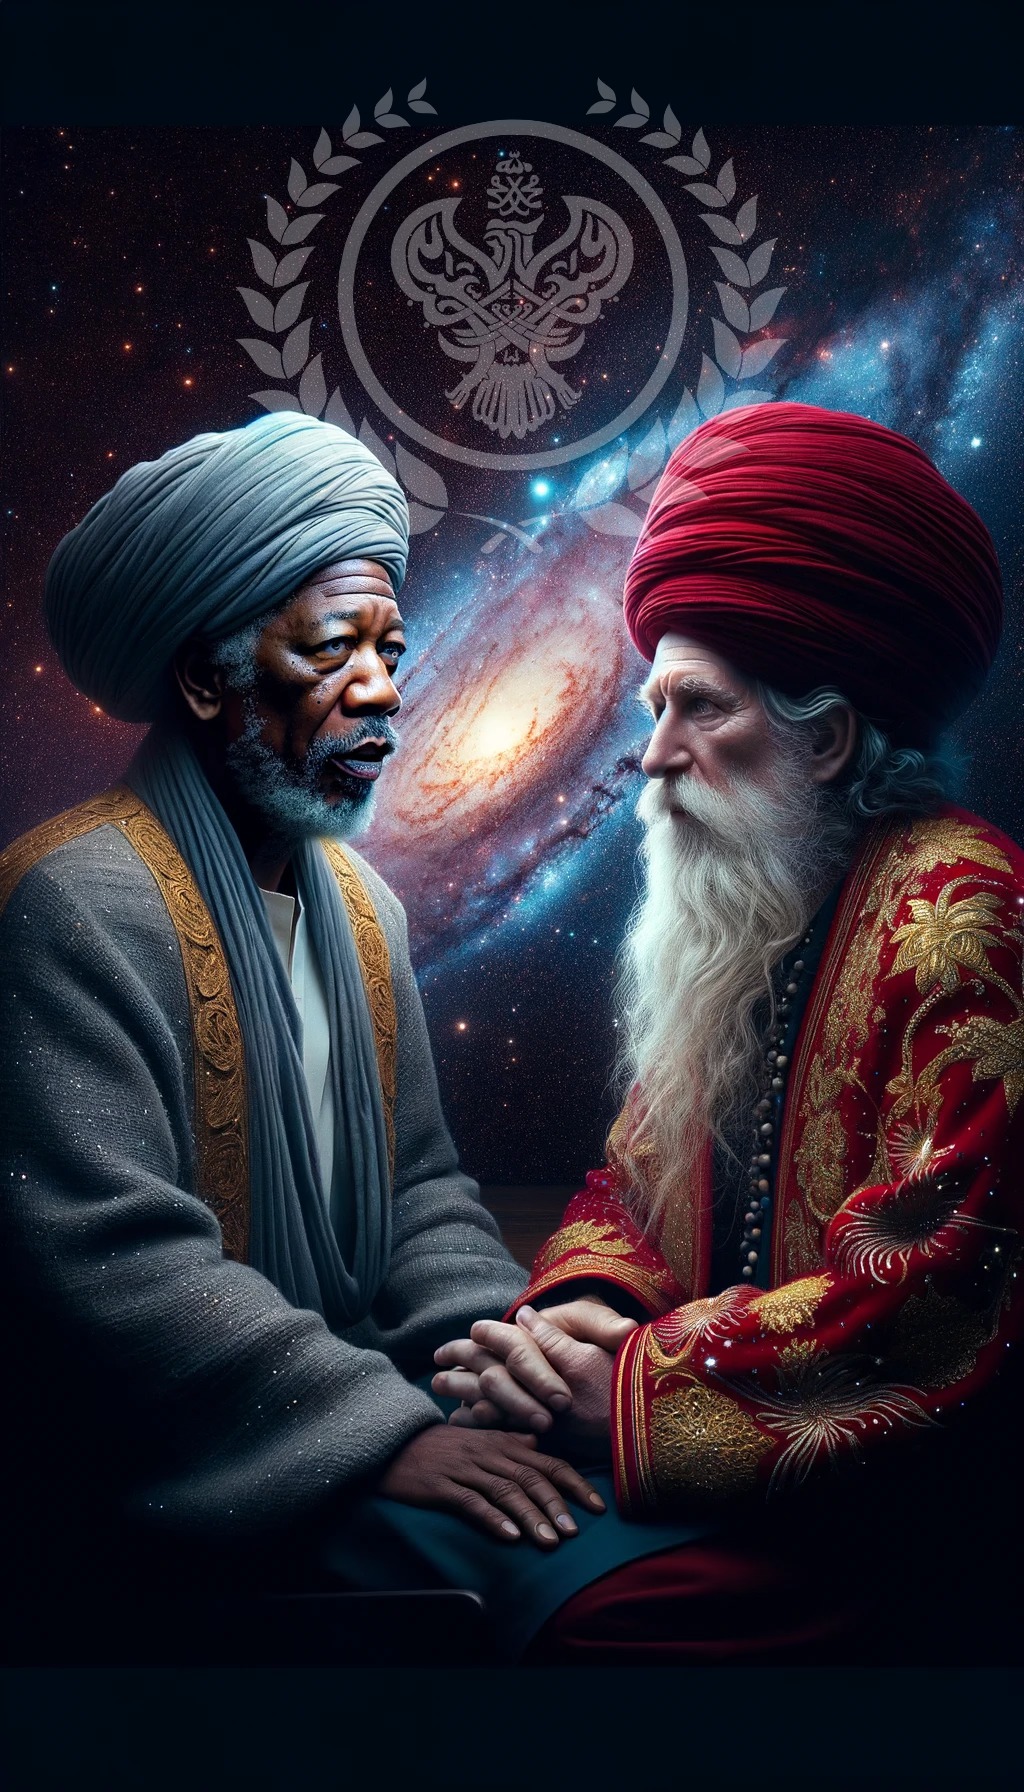 A sufi man with red turban with morgan freeman sitting in space